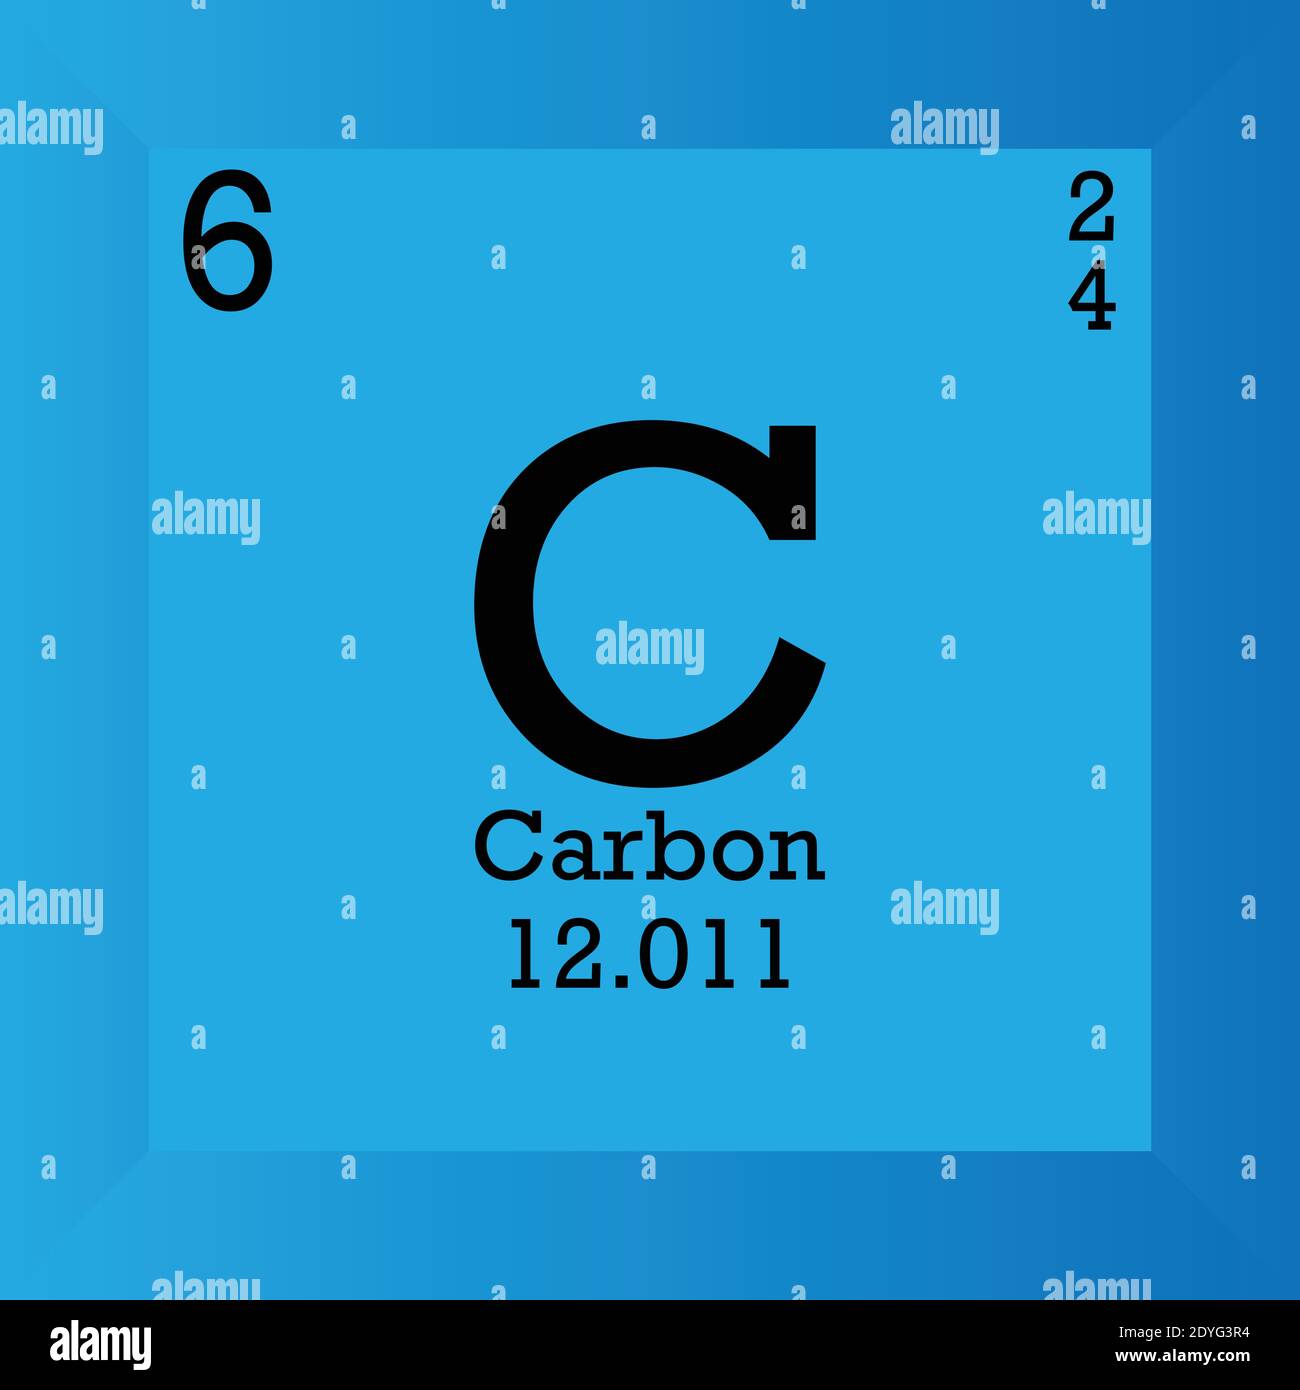 C Carbon Chemical Element Periodic Table. Single vector illustration, element icon with molar mass, atomic number and electron conf. Stock Vector